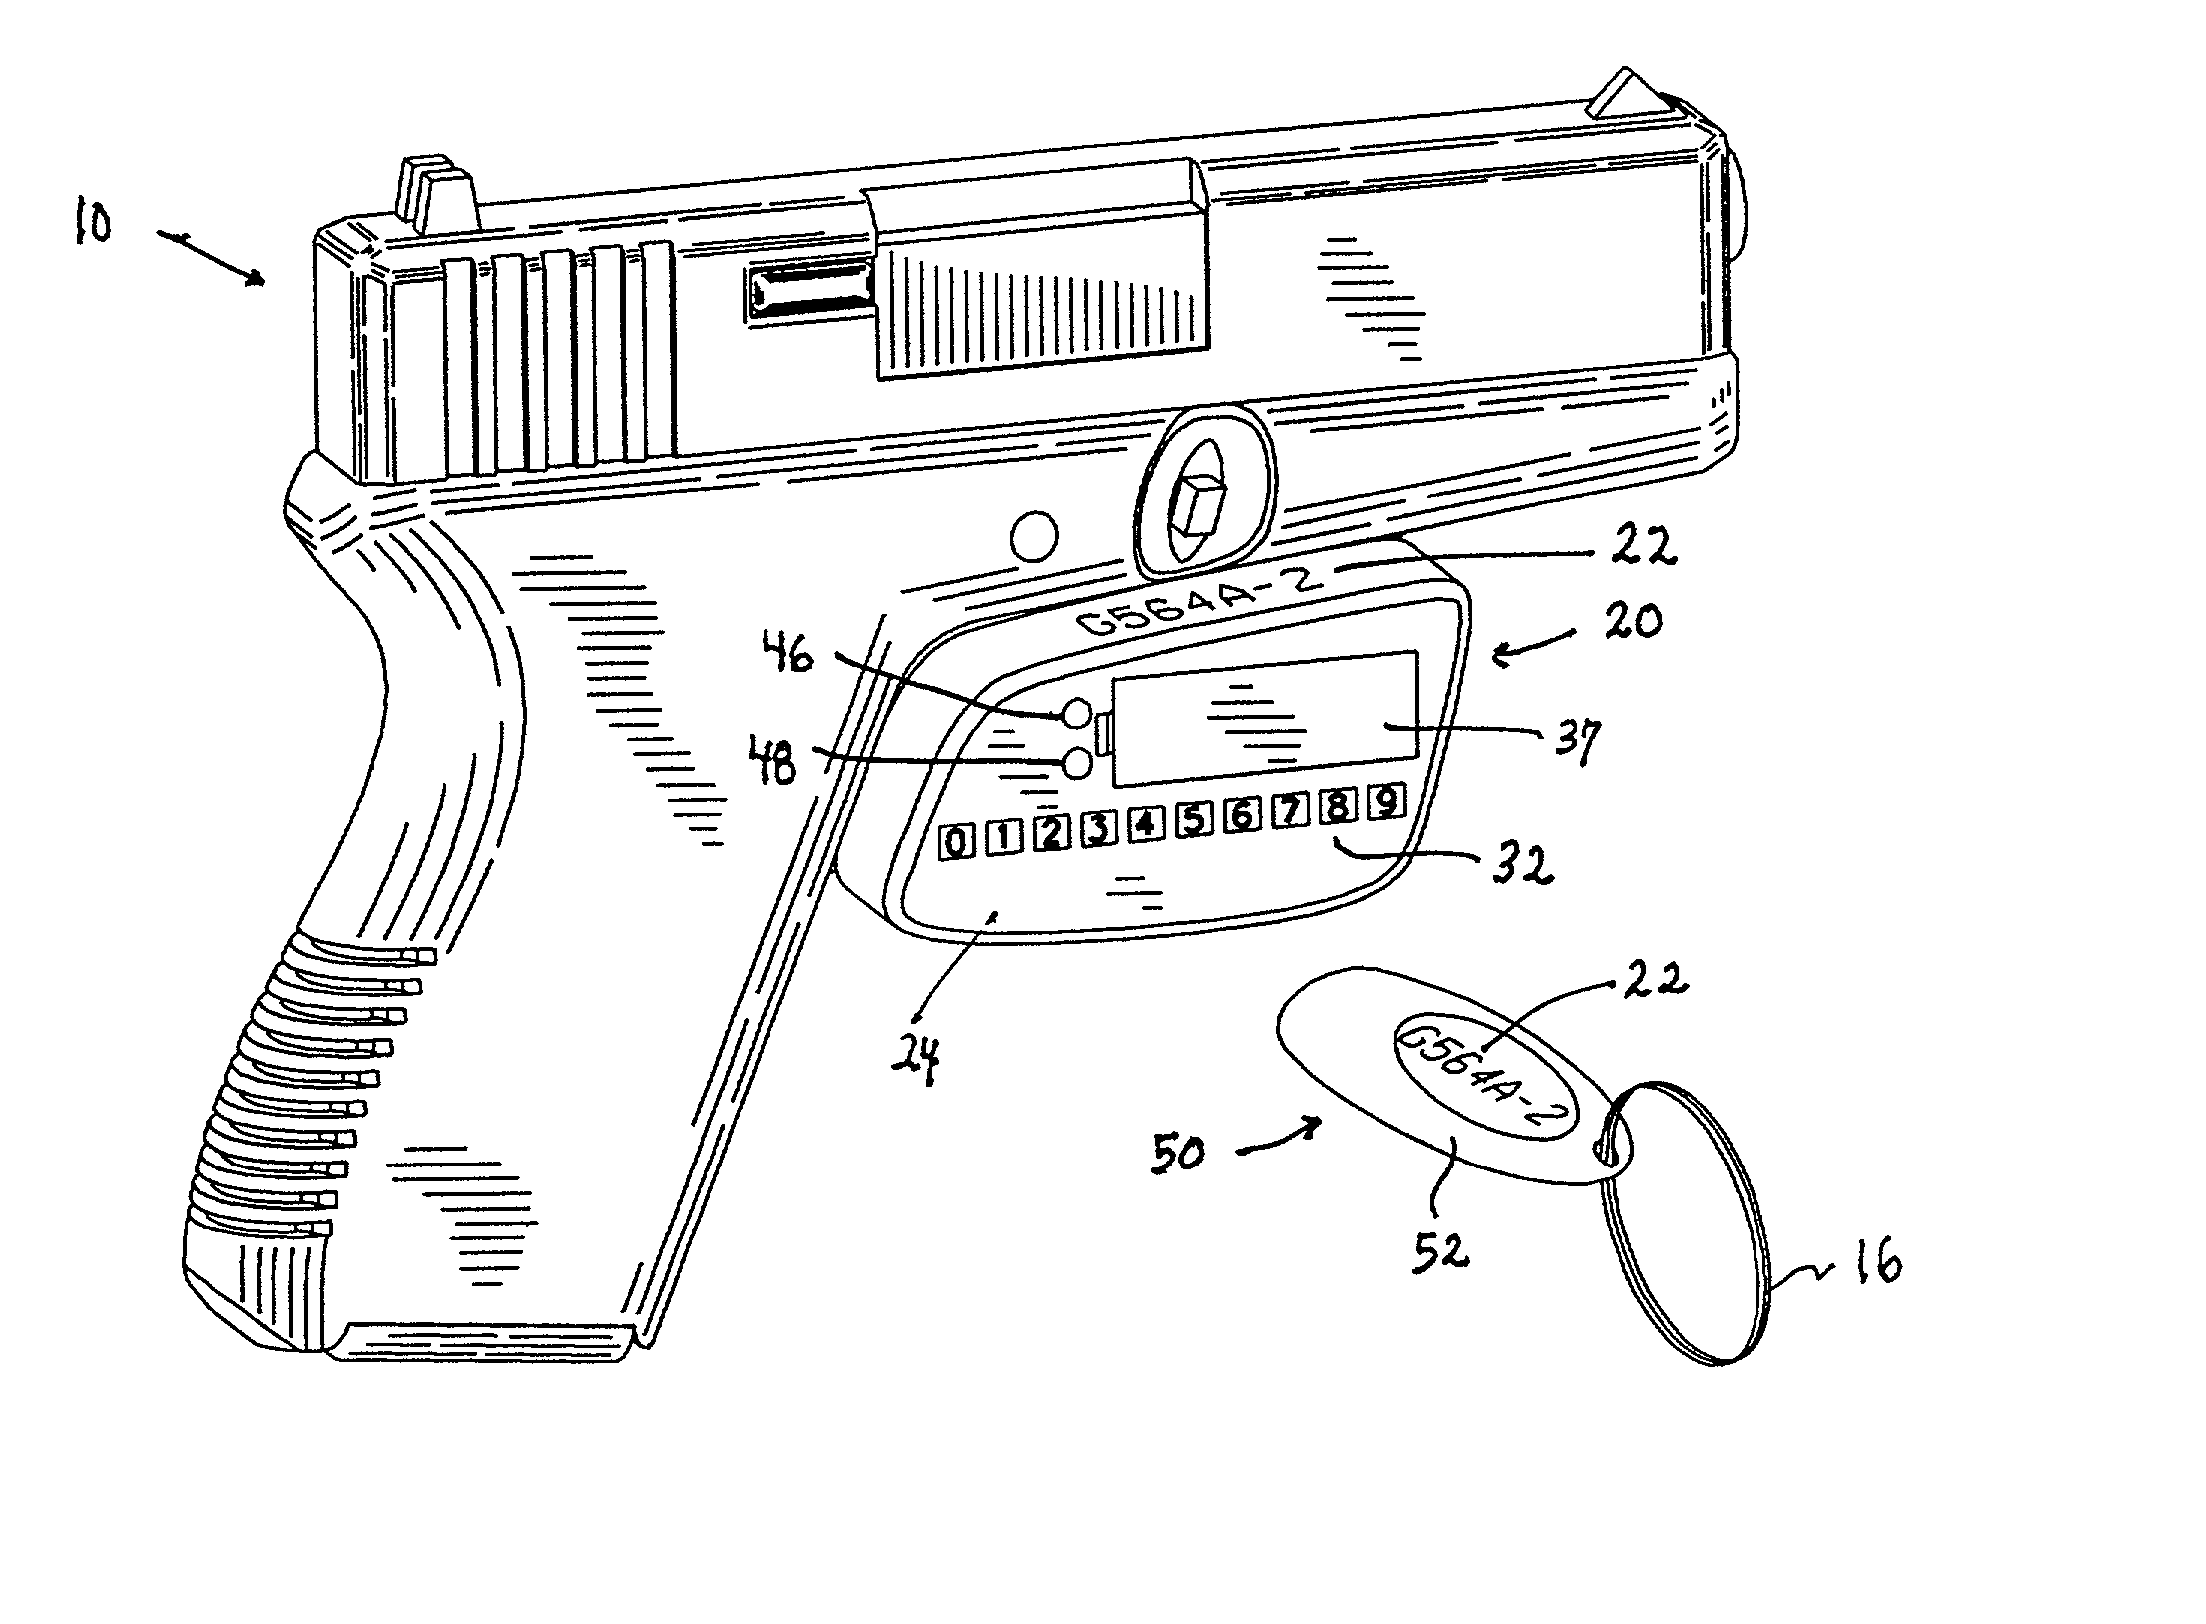 Electronic trigger lock apparatus and system